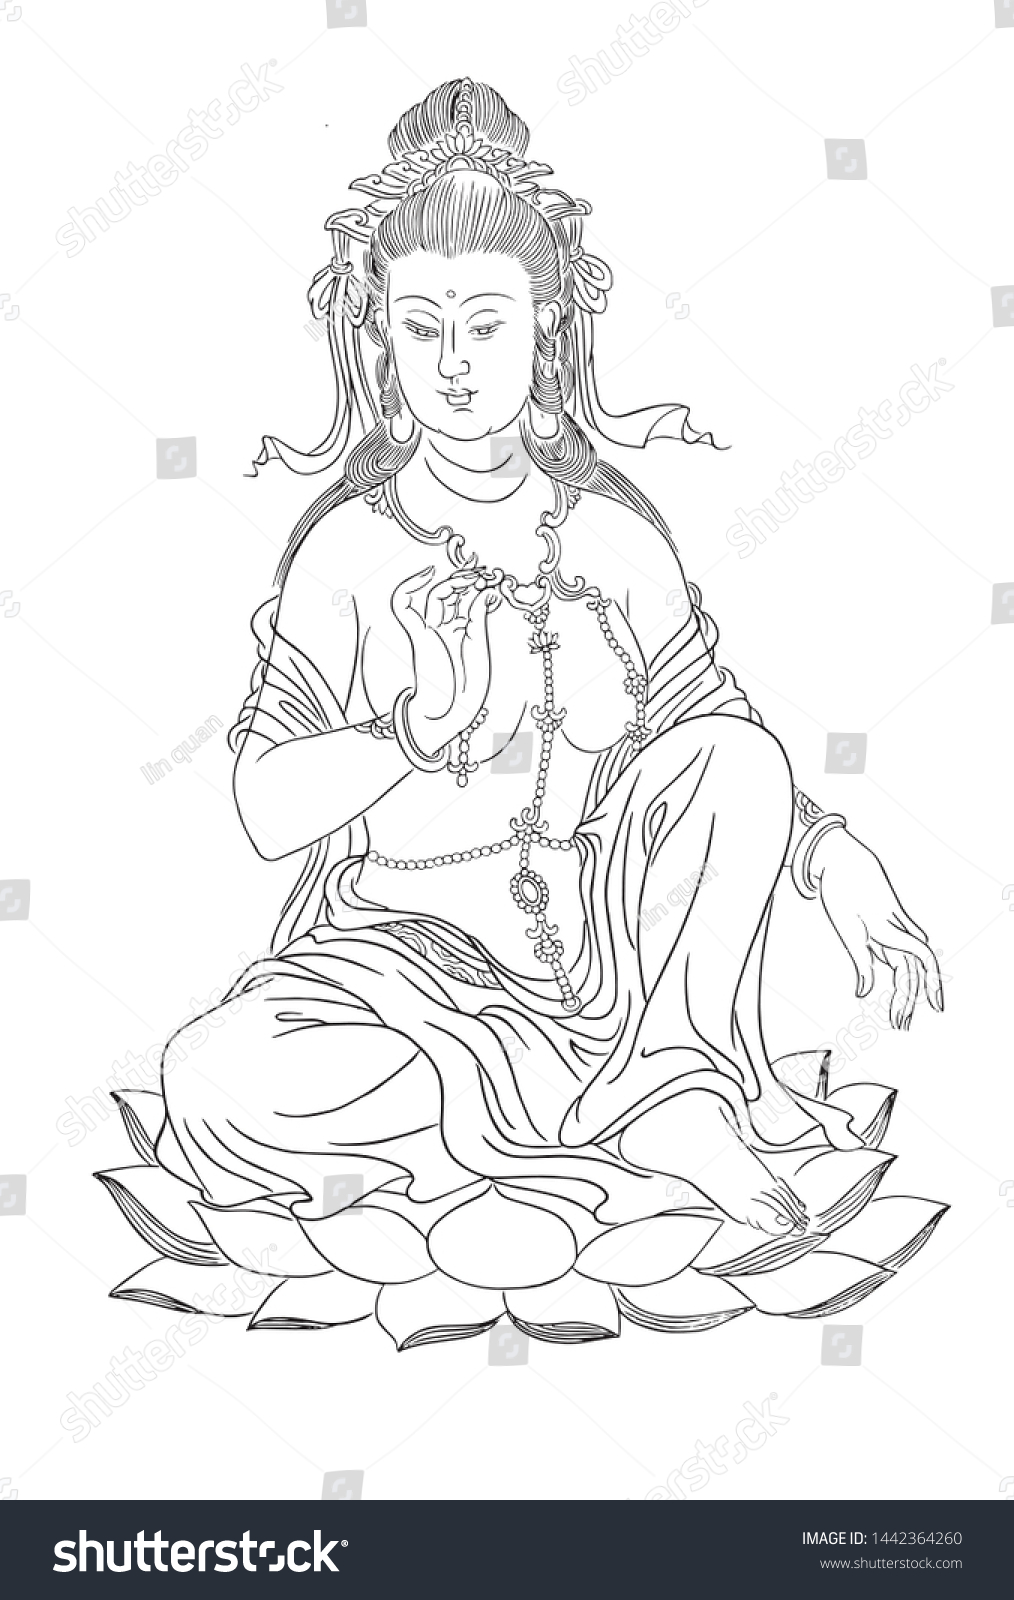 This Line Drawing Buddhist Buddha Stock Vector (Royalty Free ...